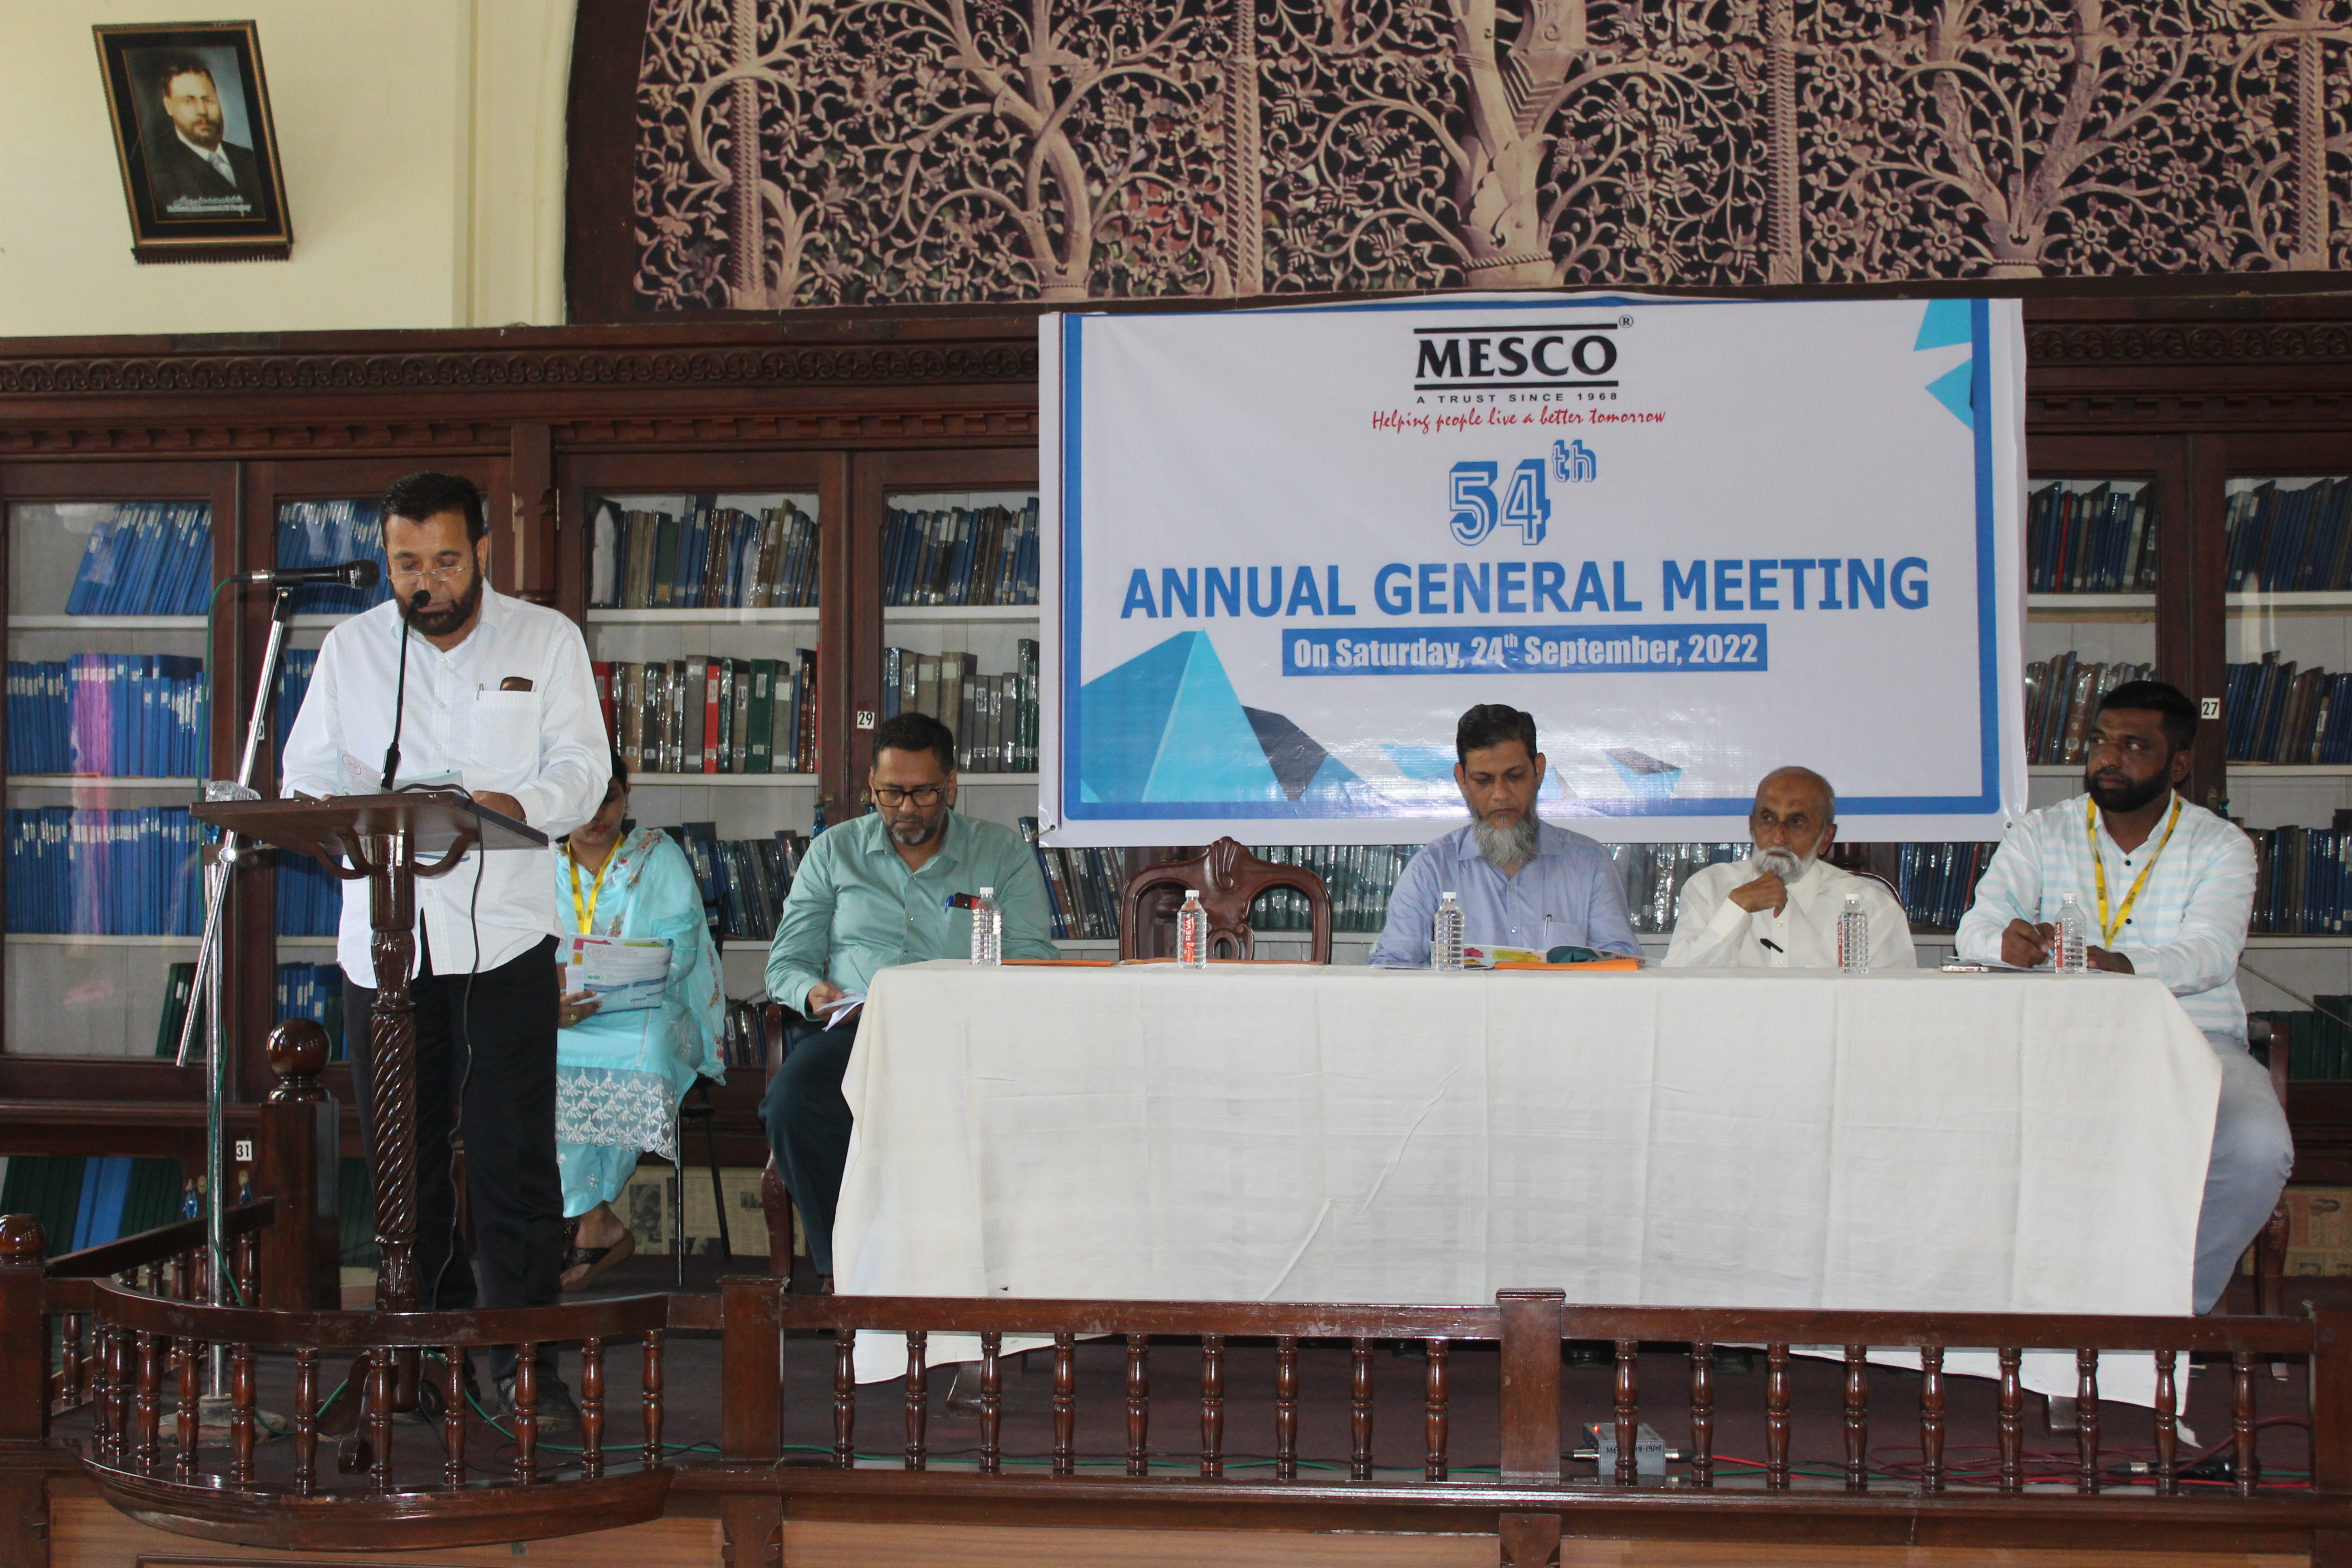 52nd Annual General Meeting